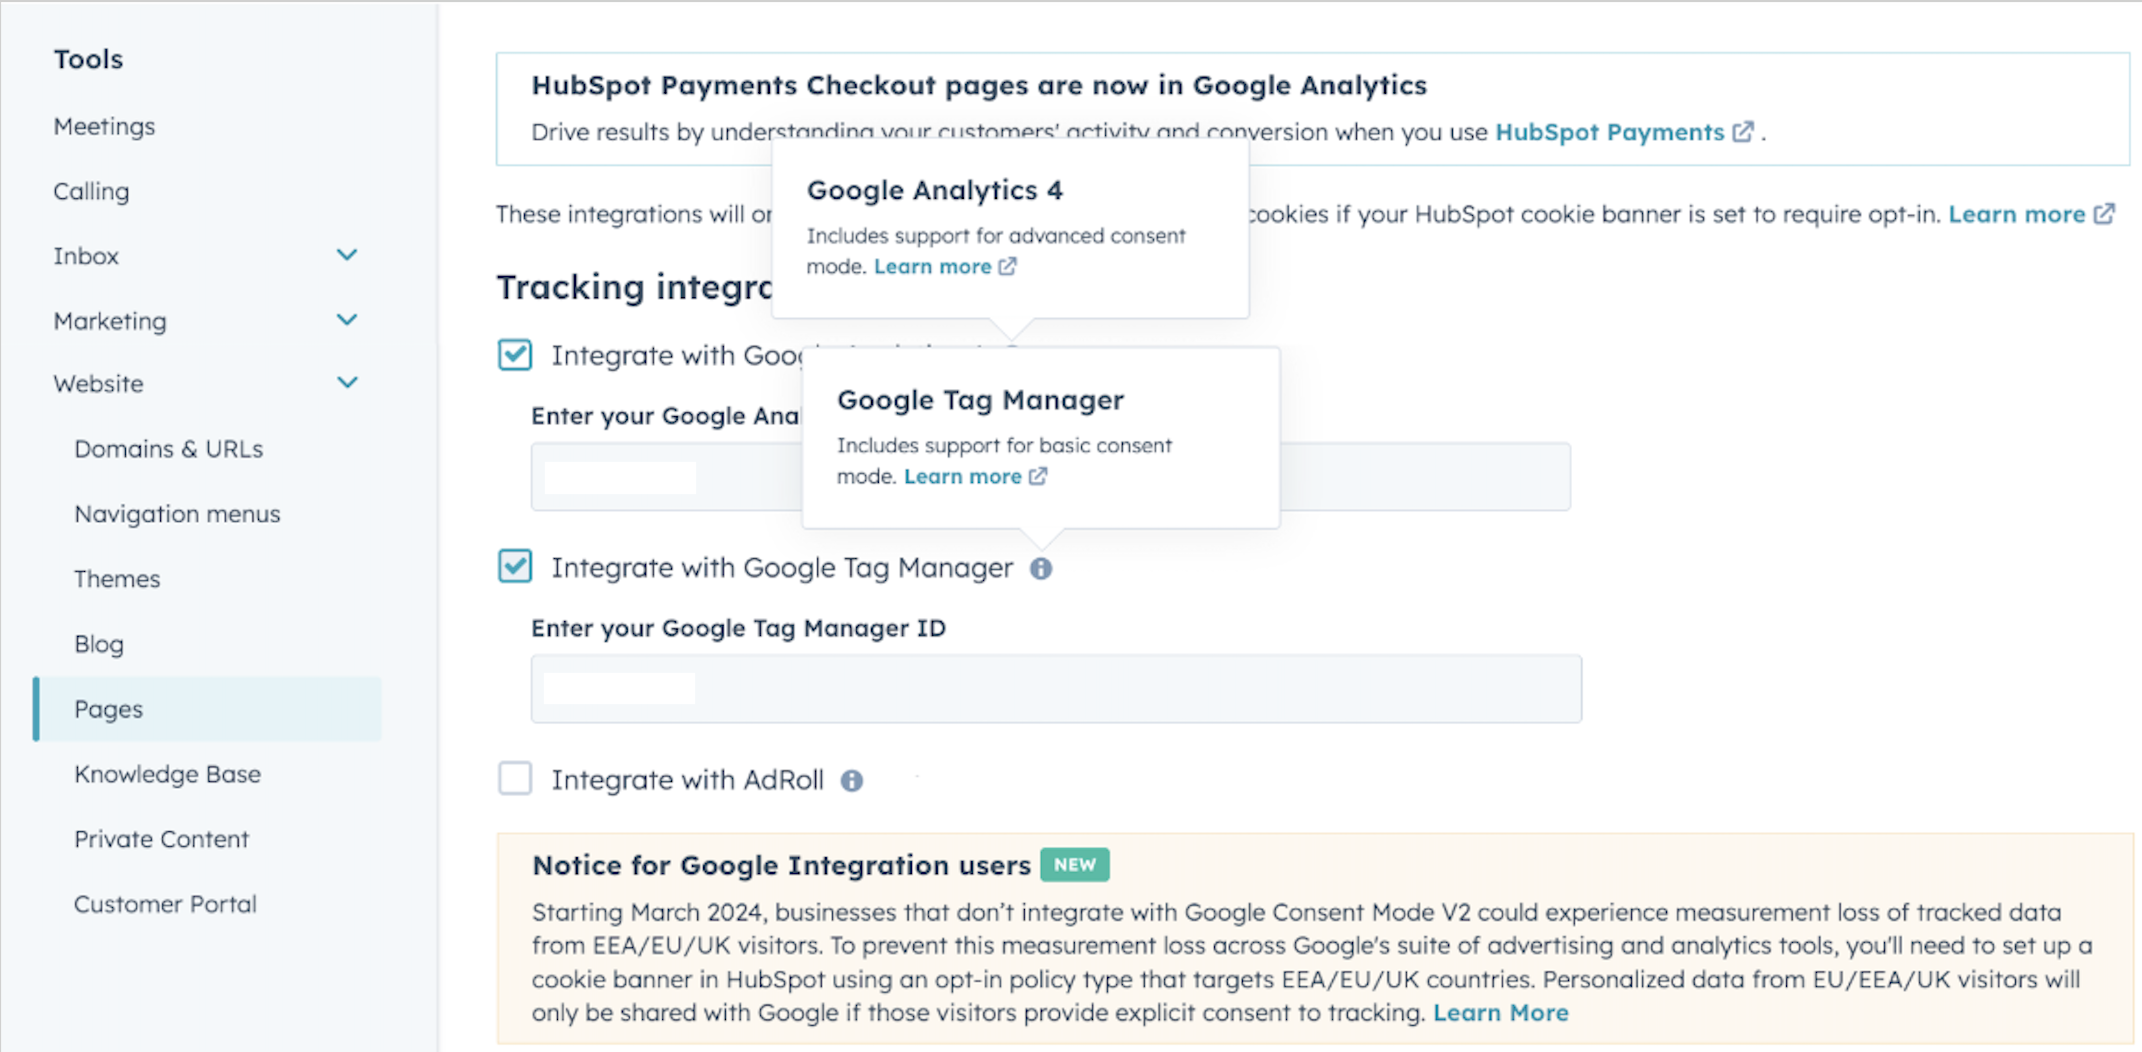 HubSpot now supports Google's Consent Mode